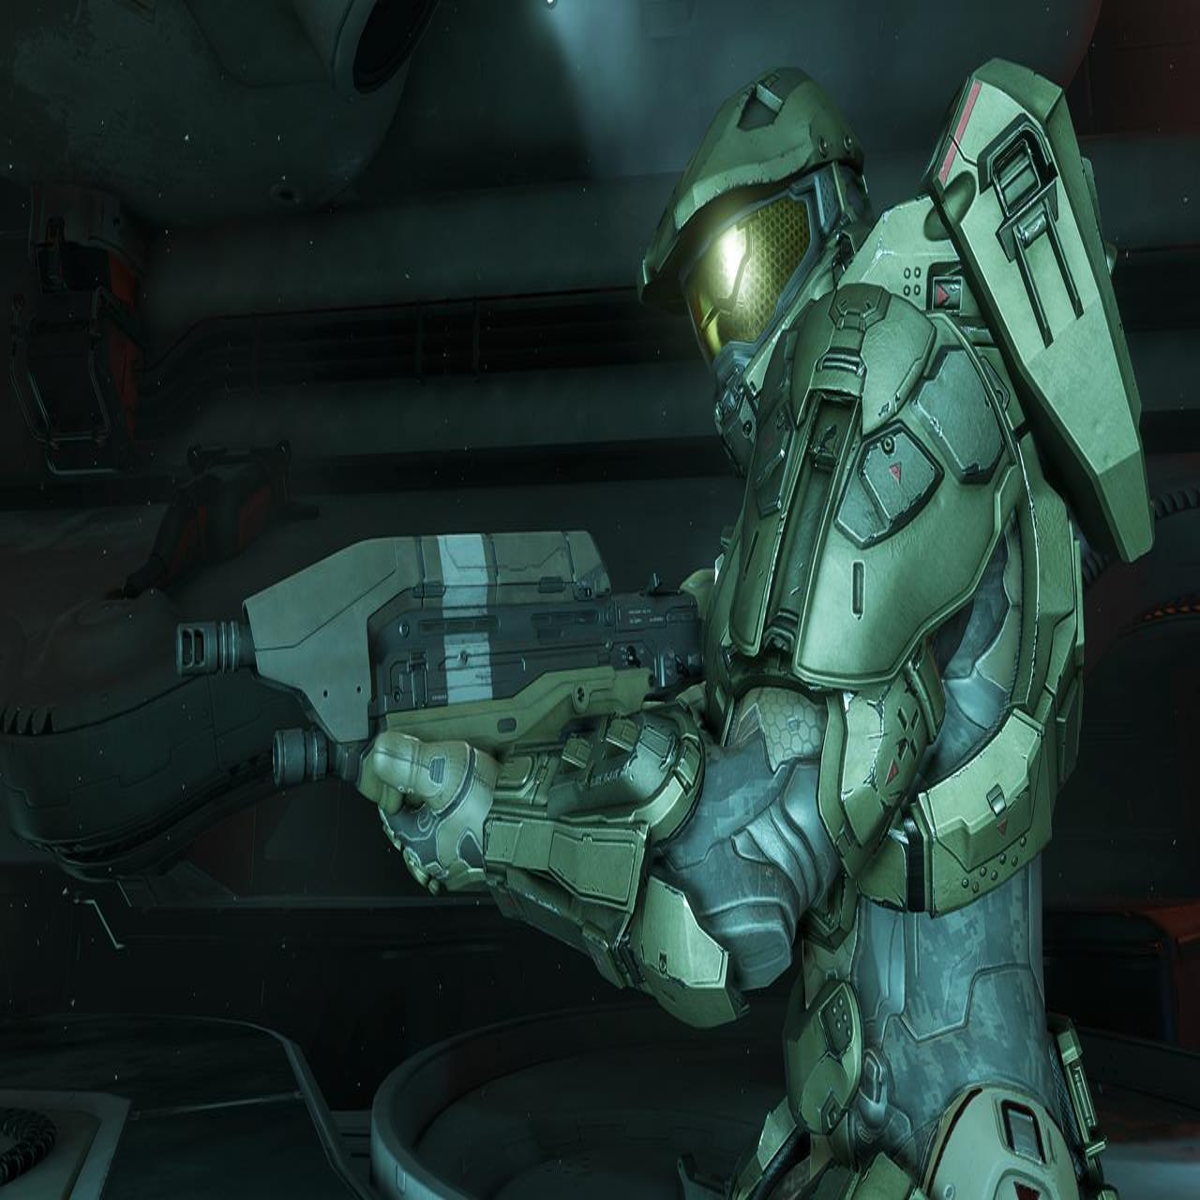 Halo 5: Guardians review: Everyone's a hero, no one's a hero